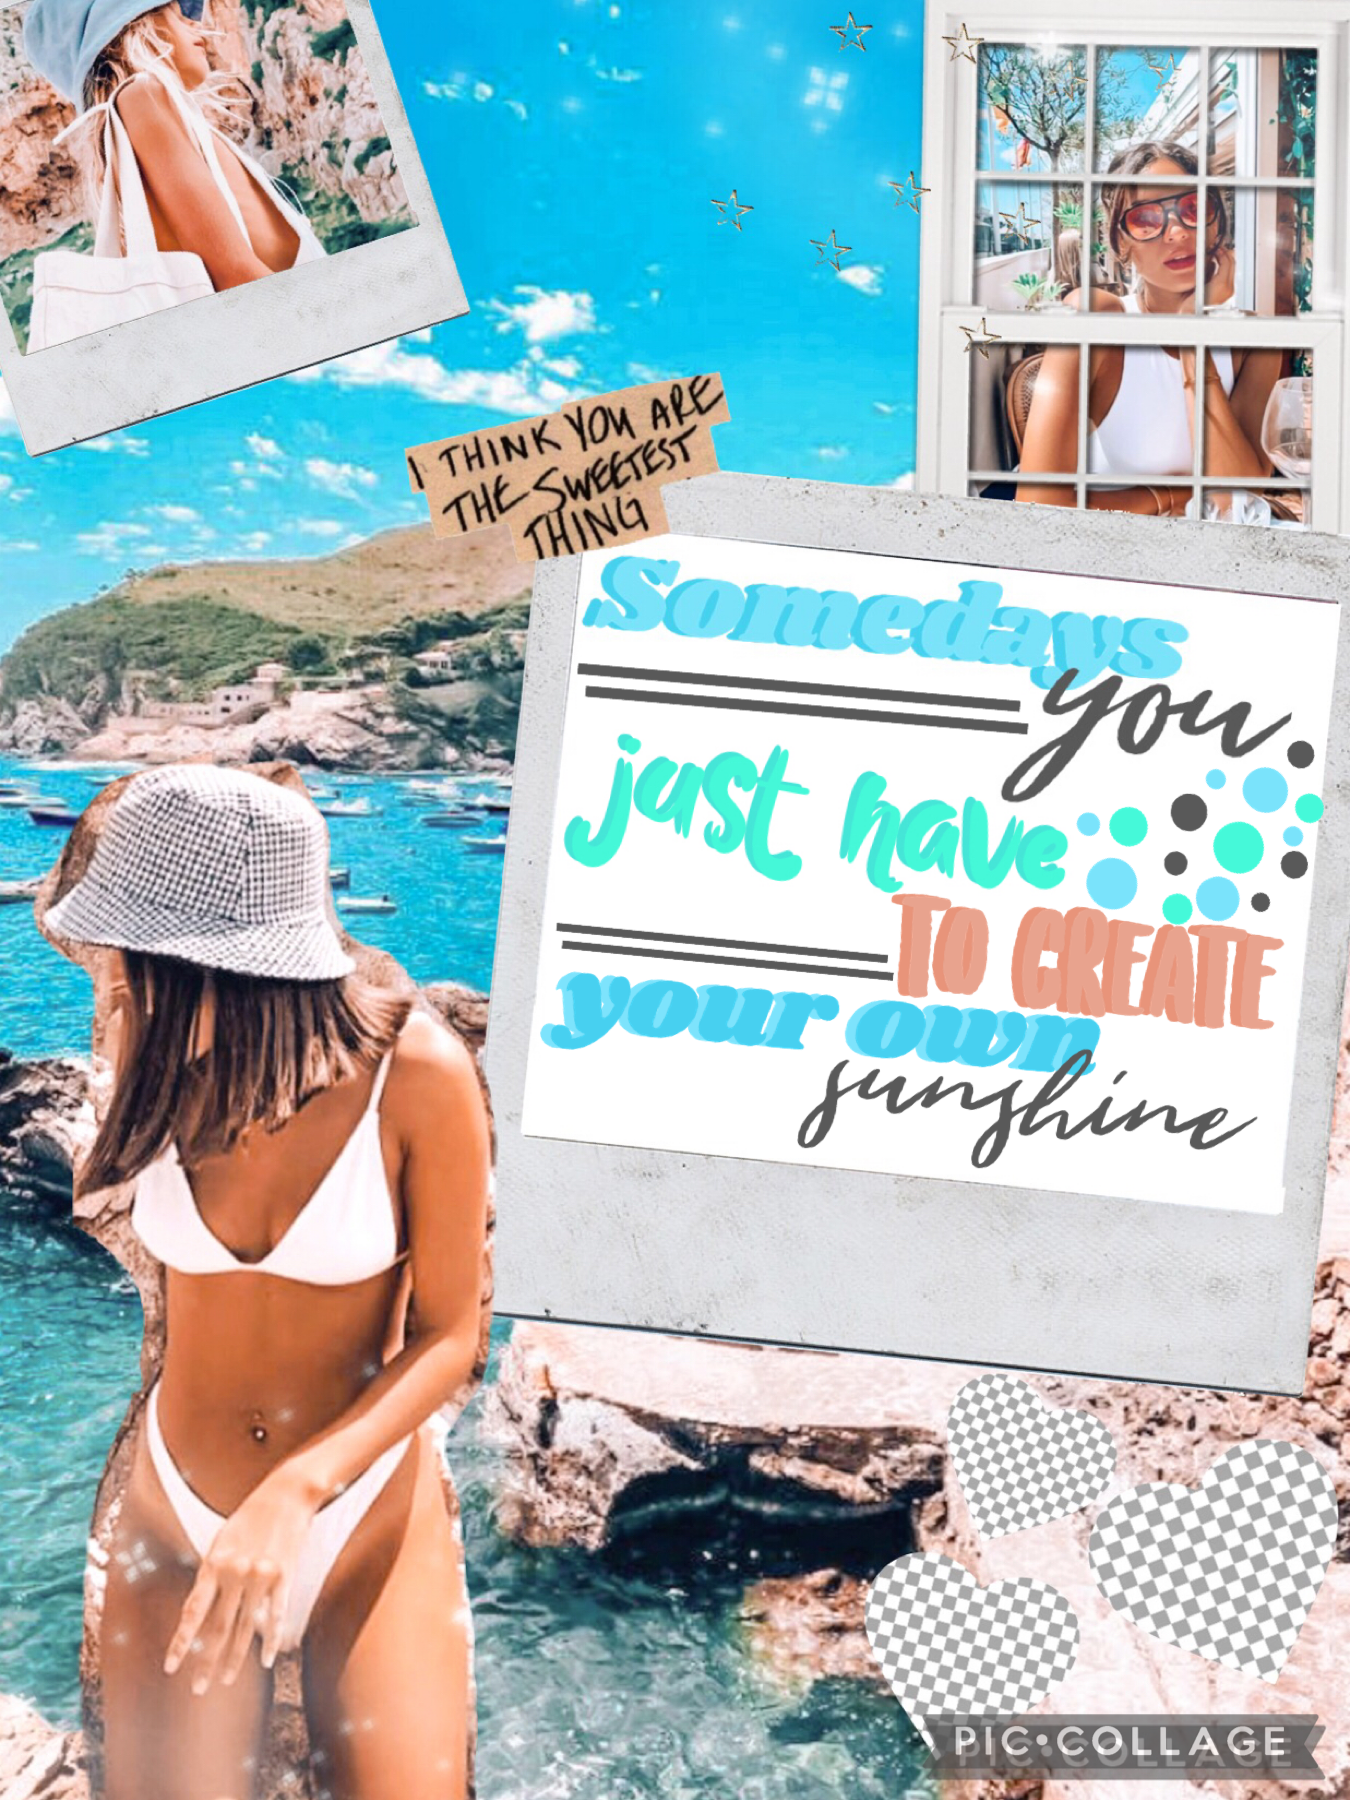 🌴Tap🌴
First preppy collage of the new theme, hope you all like it! I am so glad I am back and posting again, I love seeing all your guys comments. The dots literally took so long omg. Do you like summer vacation or school better? Aotd: Maybe Summer vacati